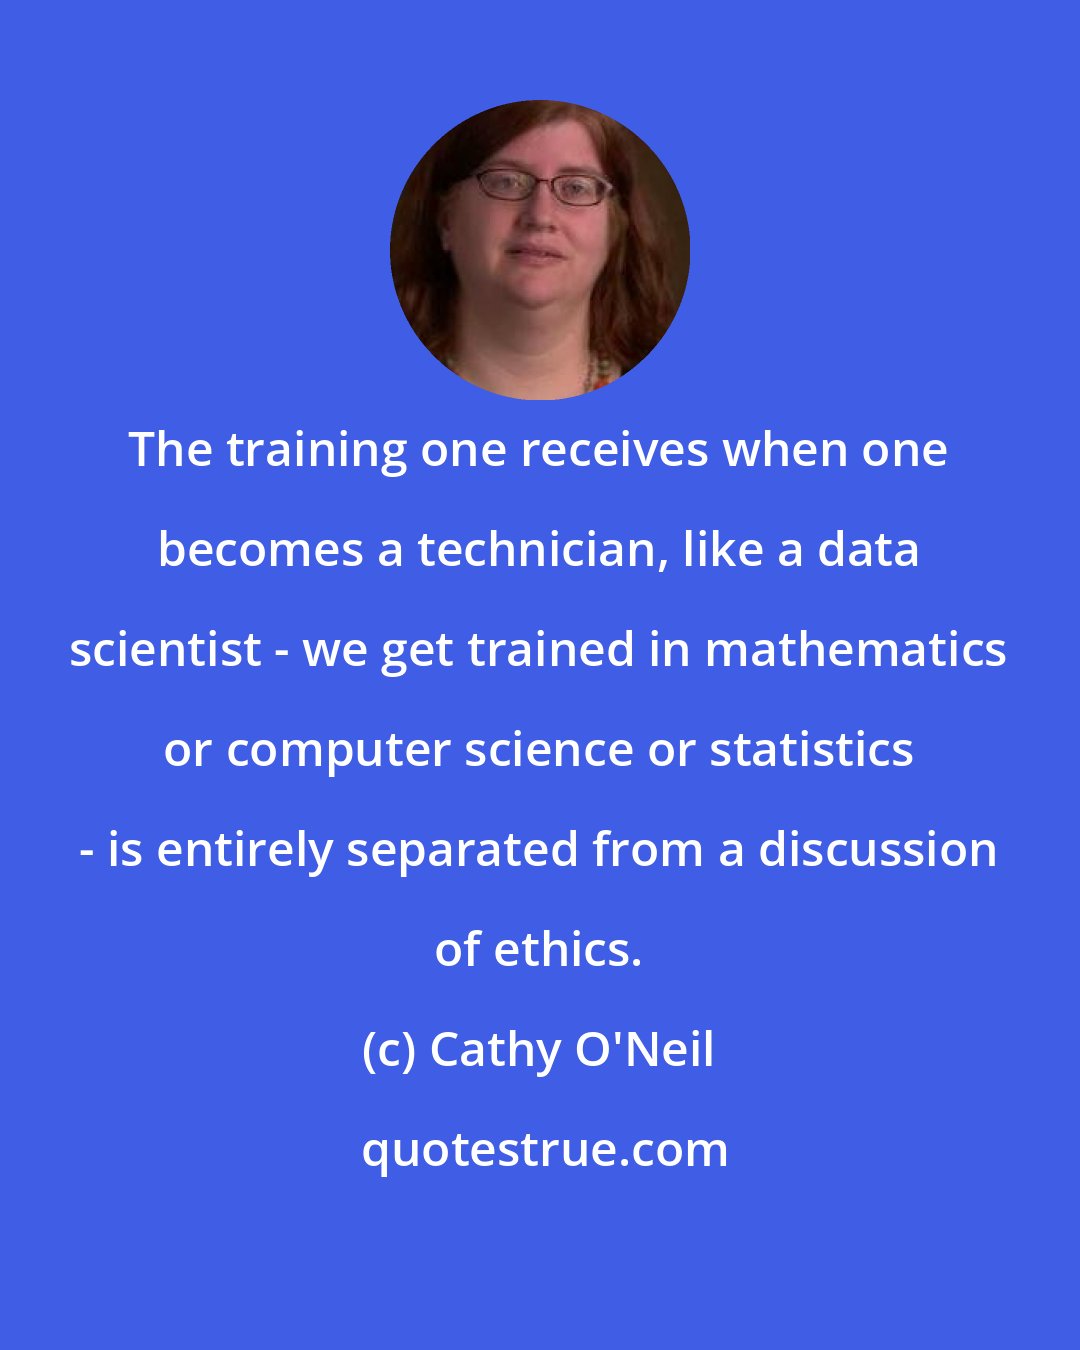 Cathy O'Neil: The training one receives when one becomes a technician, like a data scientist - we get trained in mathematics or computer science or statistics - is entirely separated from a discussion of ethics.